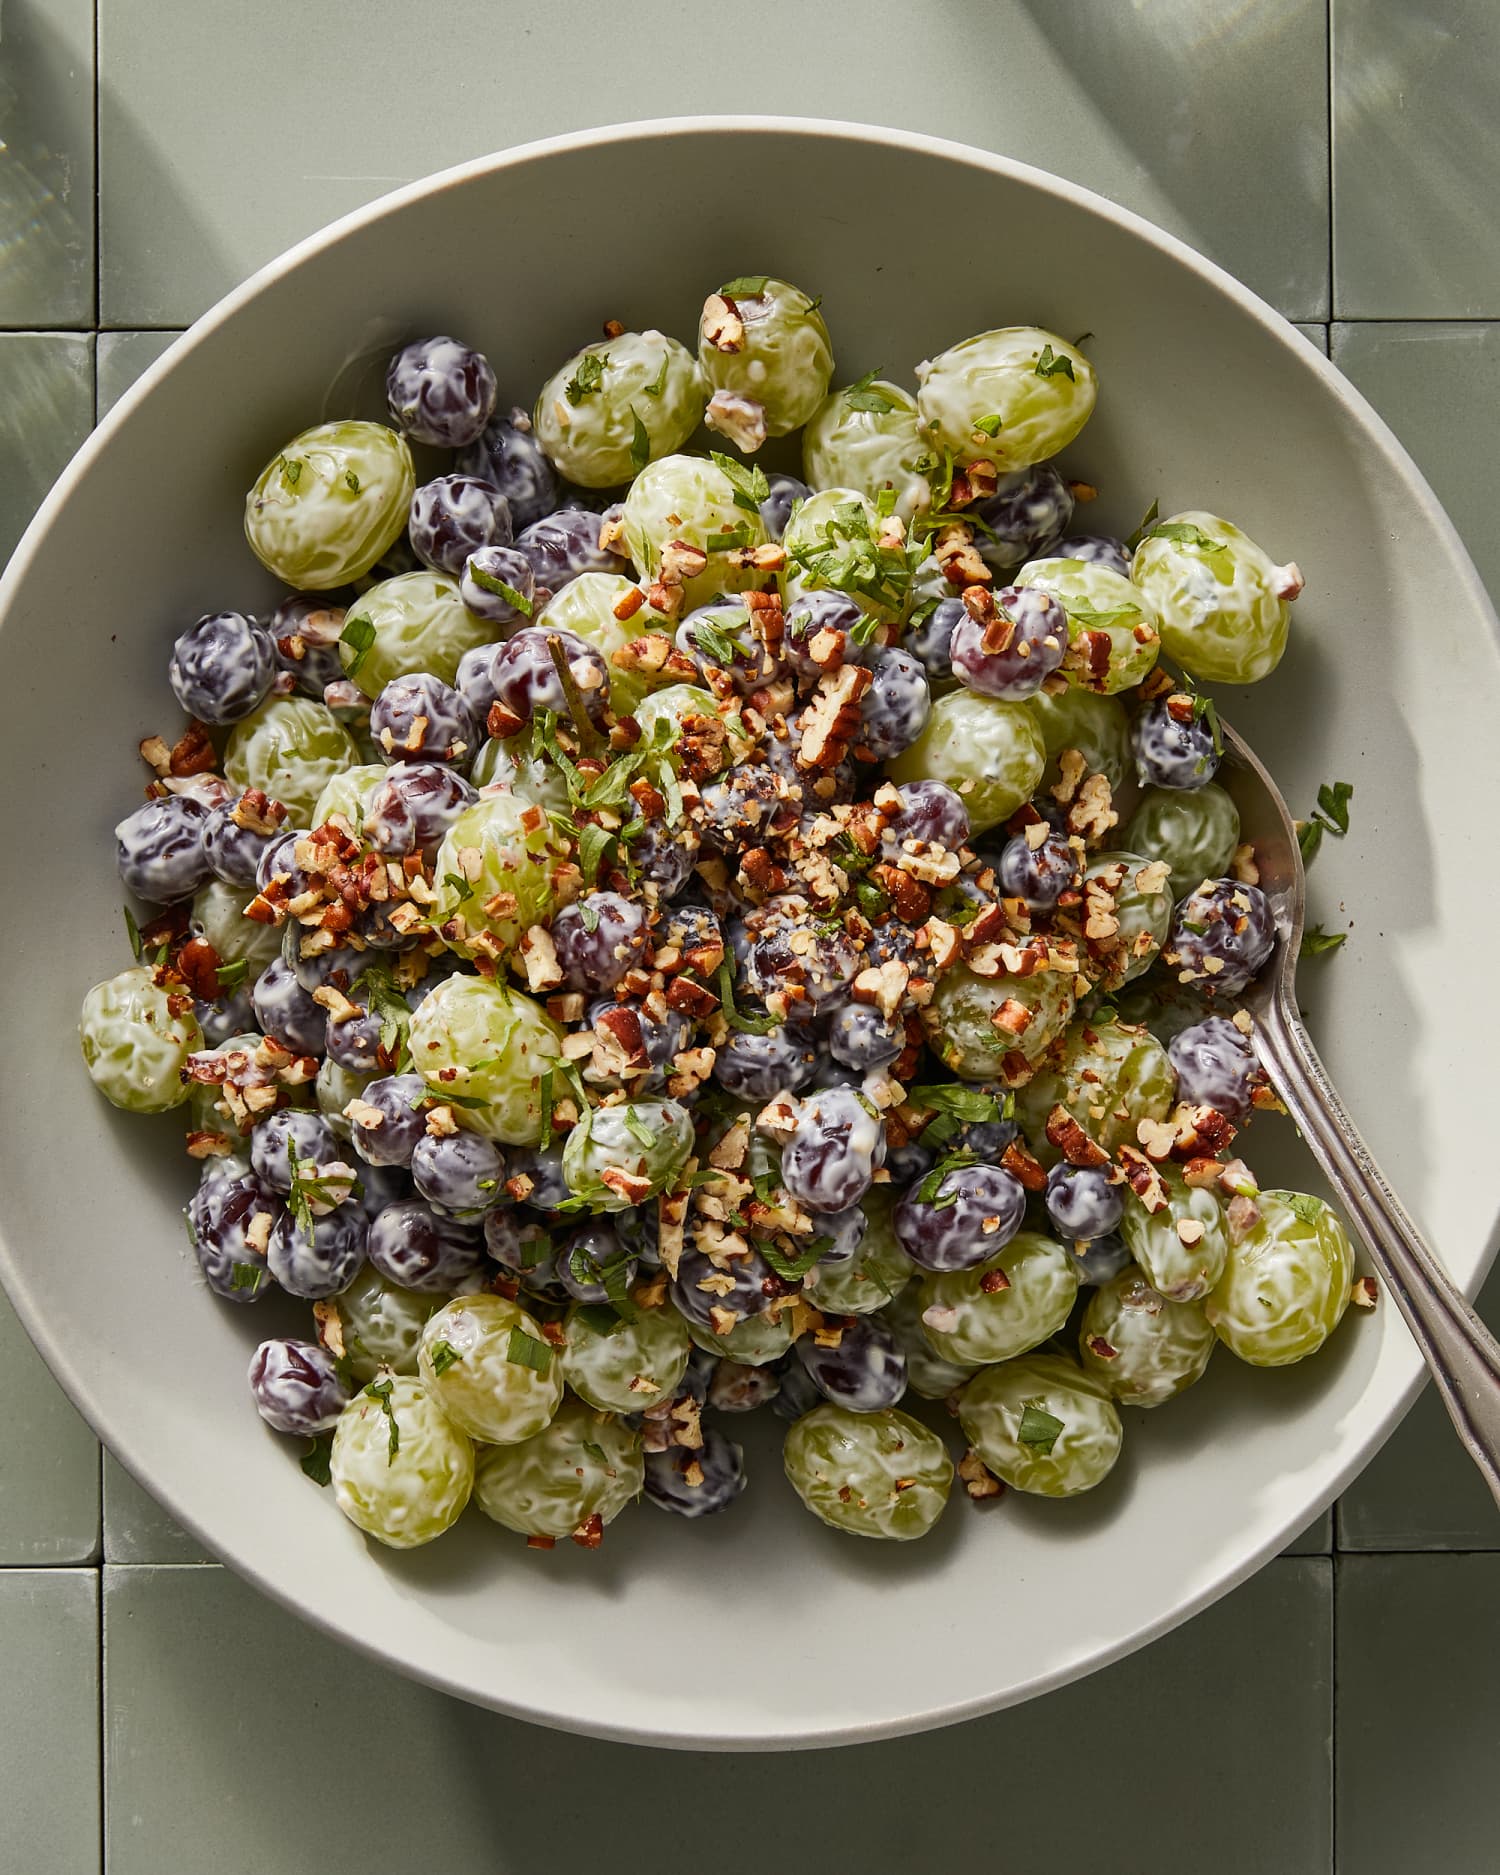 This Grape Salad Recipe Is the Surprise Hit of Summer